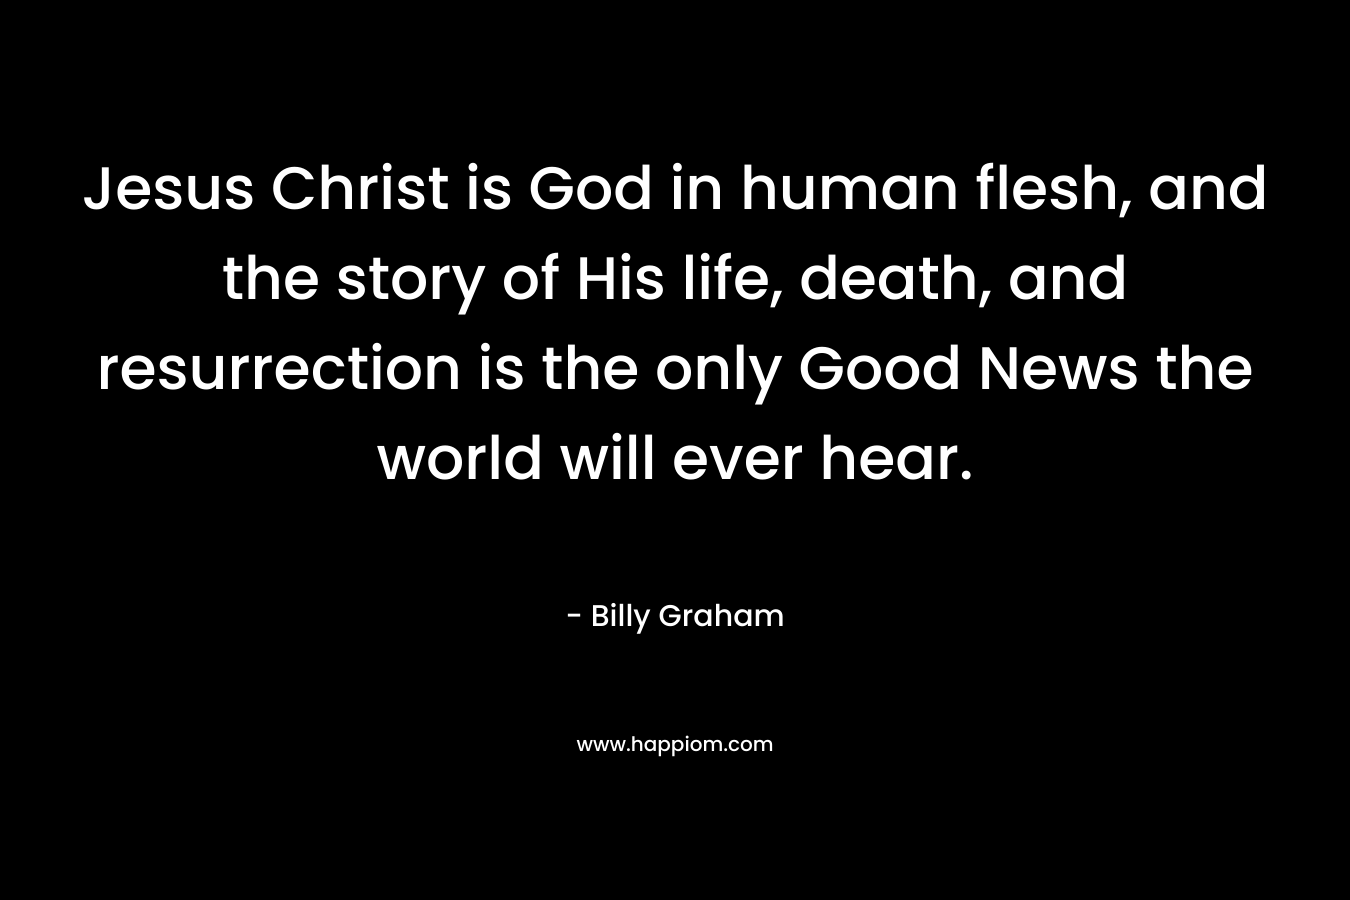 Jesus Christ is God in human flesh, and the story of His life, death, and resurrection is the only Good News the world will ever hear. – Billy Graham